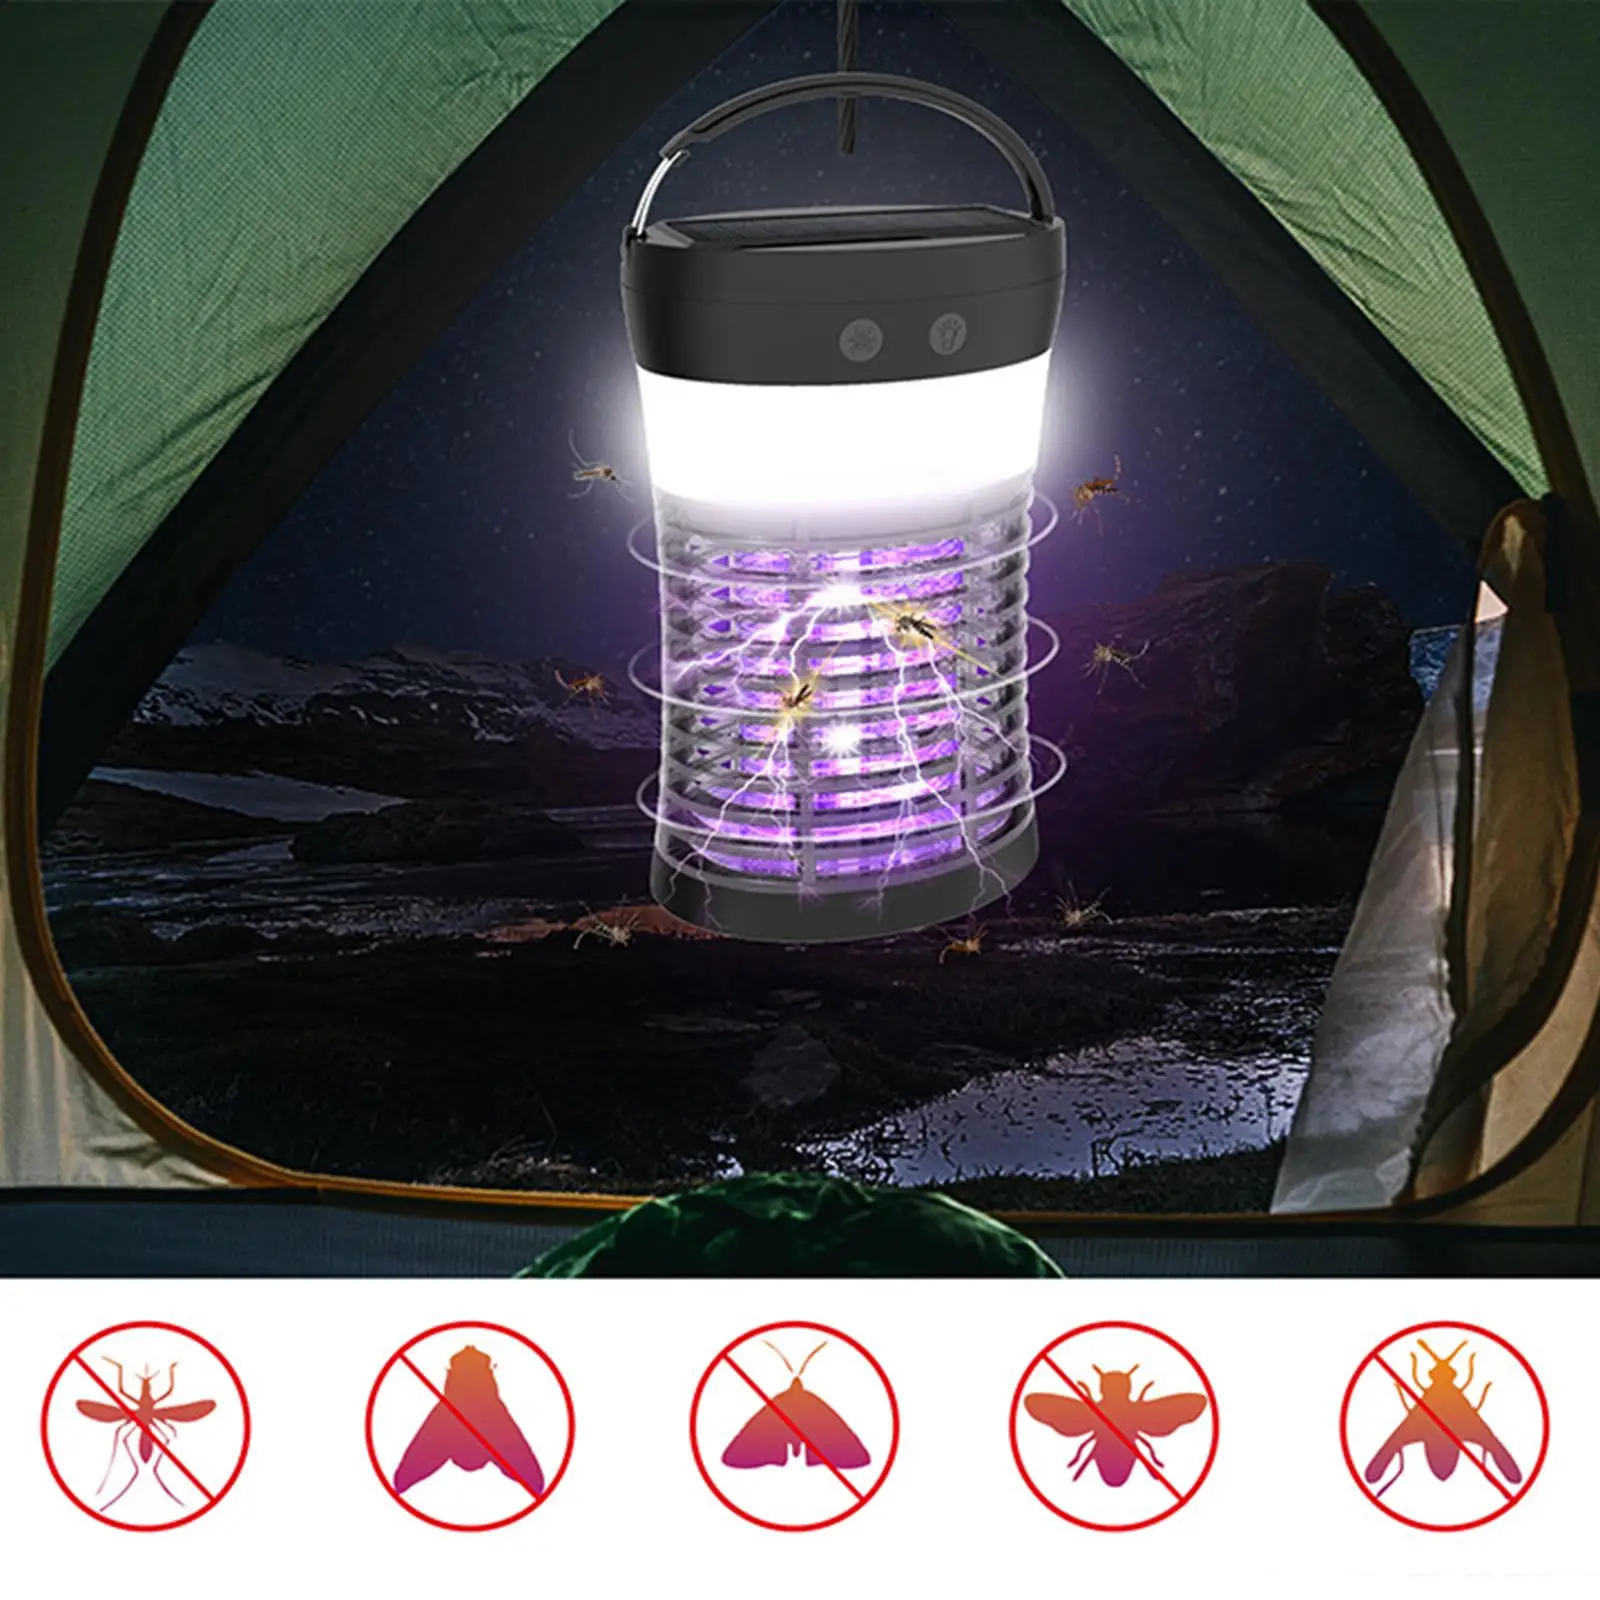 2 in1 LED USB Solar Power Mosquito Killer Lamp Protable Lantern Outdoor Repellent Light Insect Bug Mosquito Trap Camping Lights